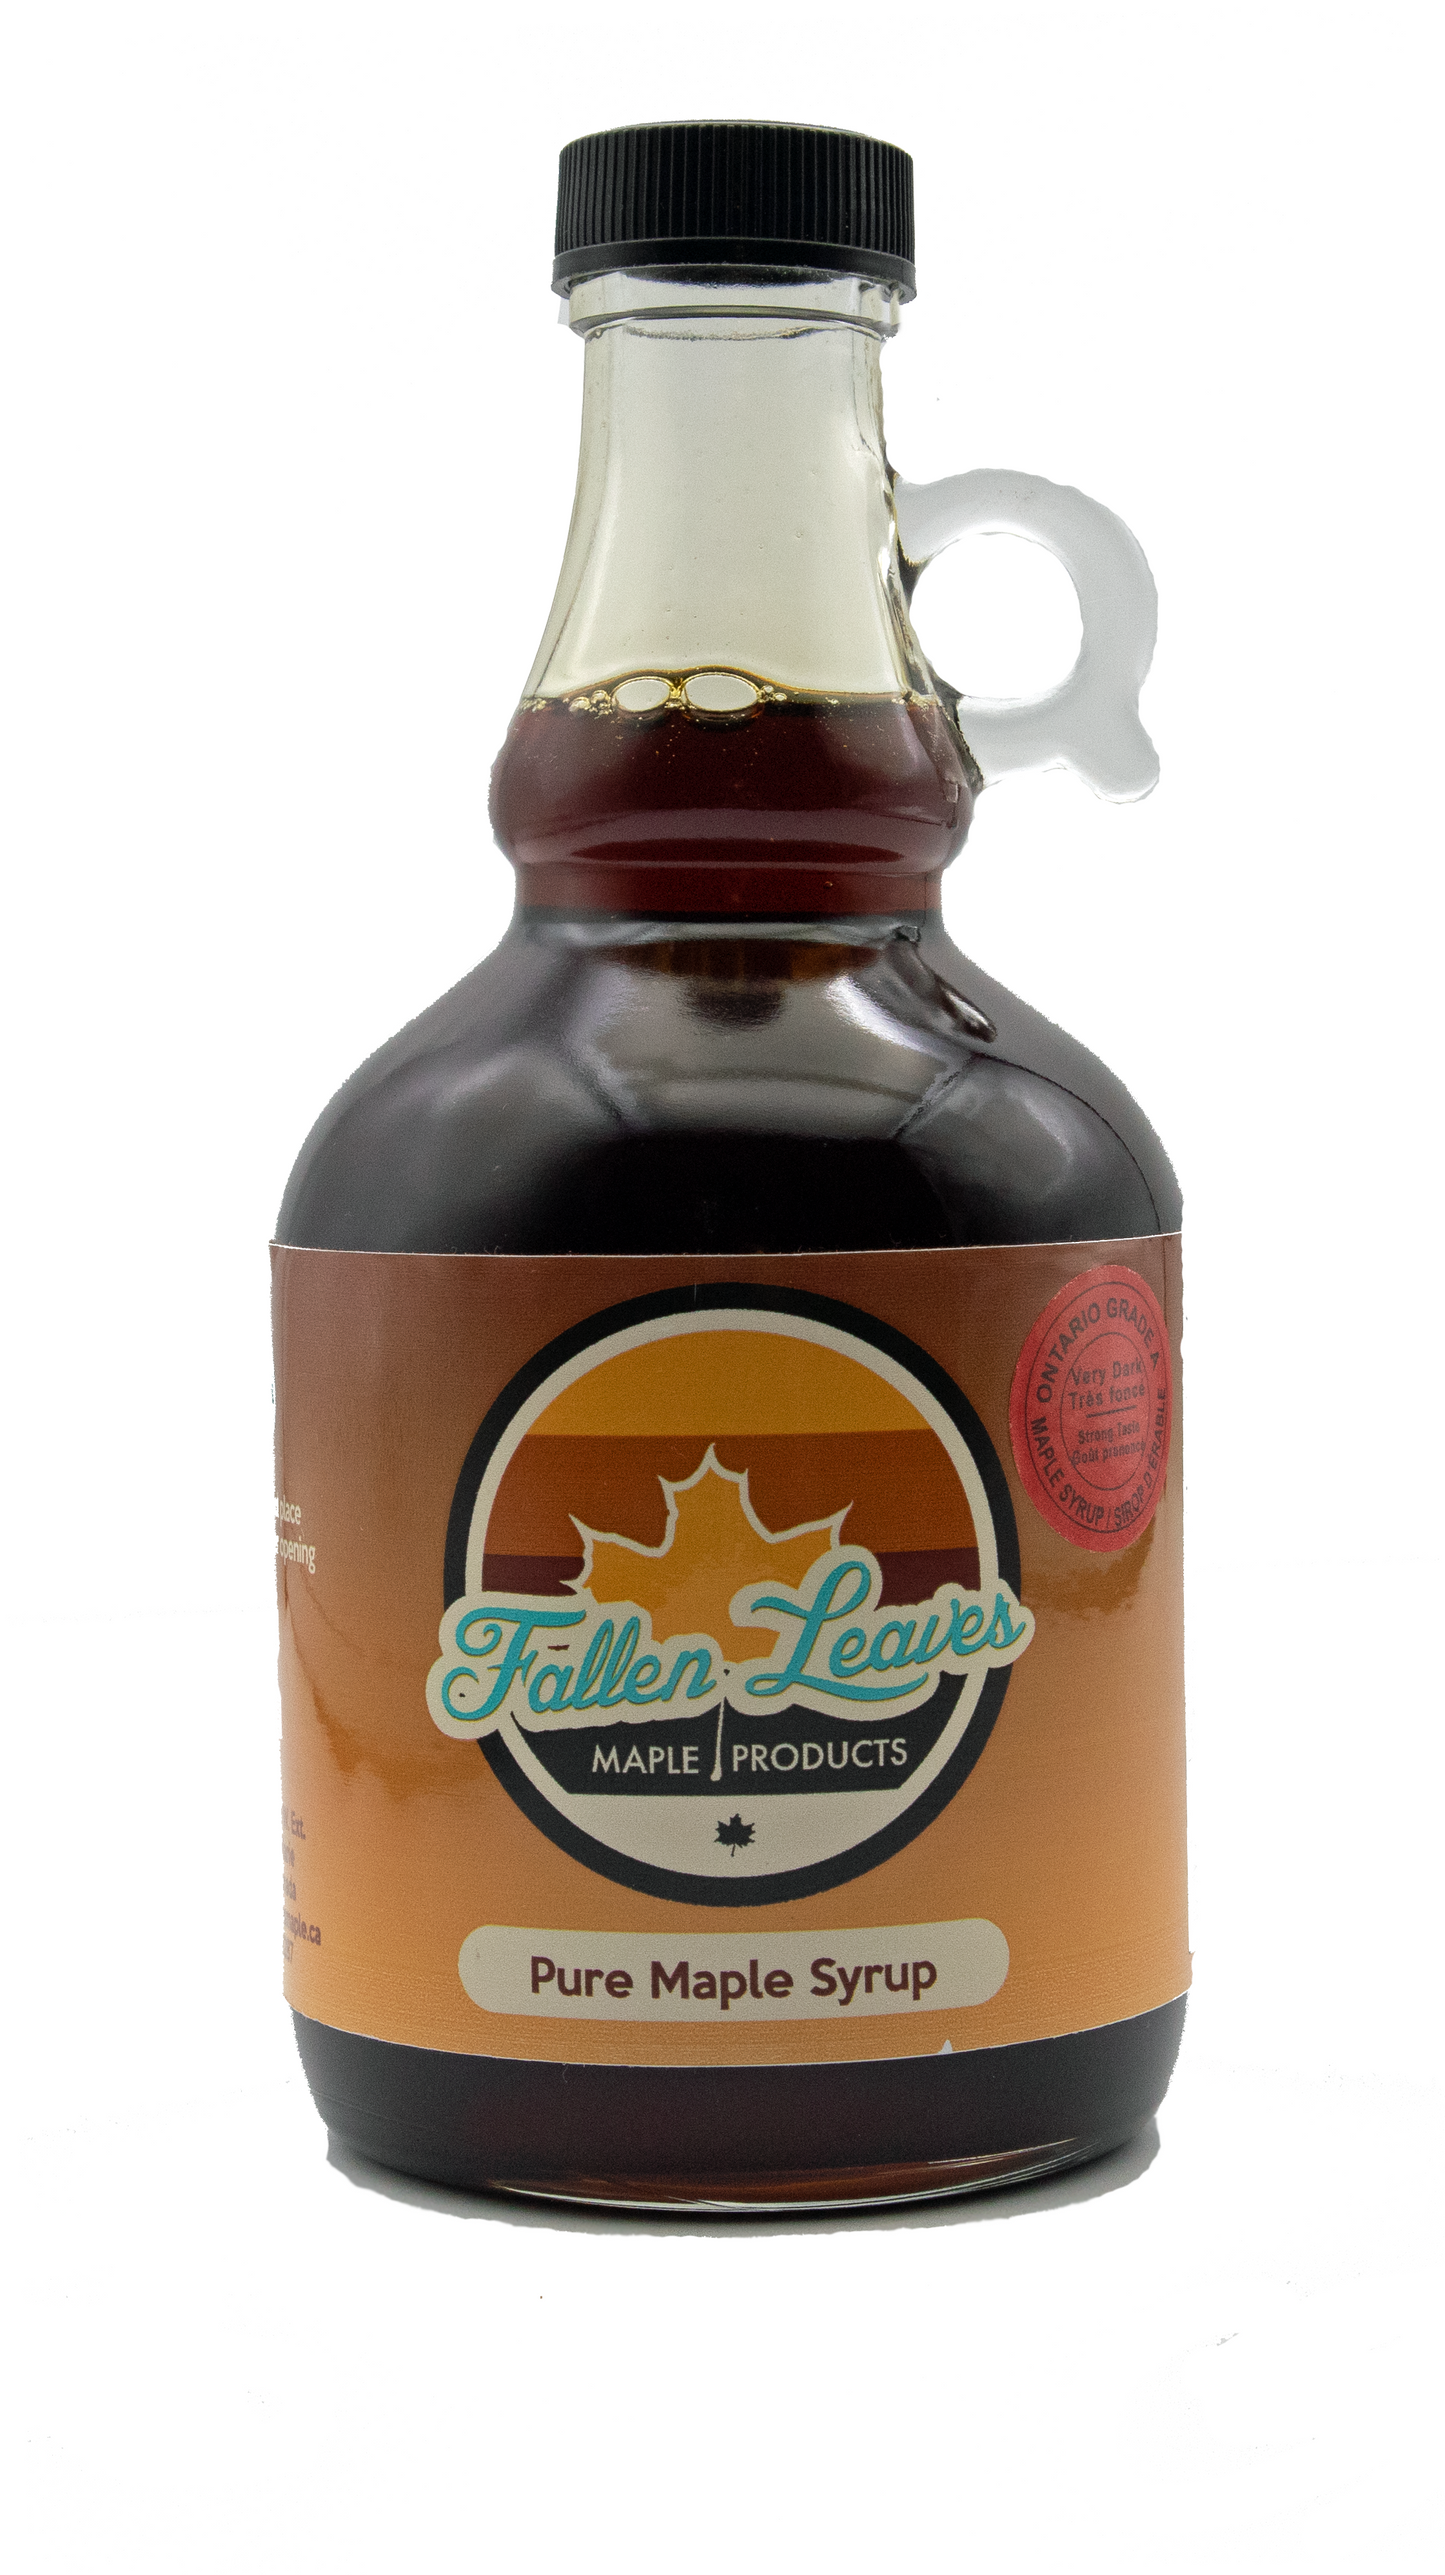 Very Dark Grade - 100% Pure Maple Syrup Fallen Leaves Maple Products